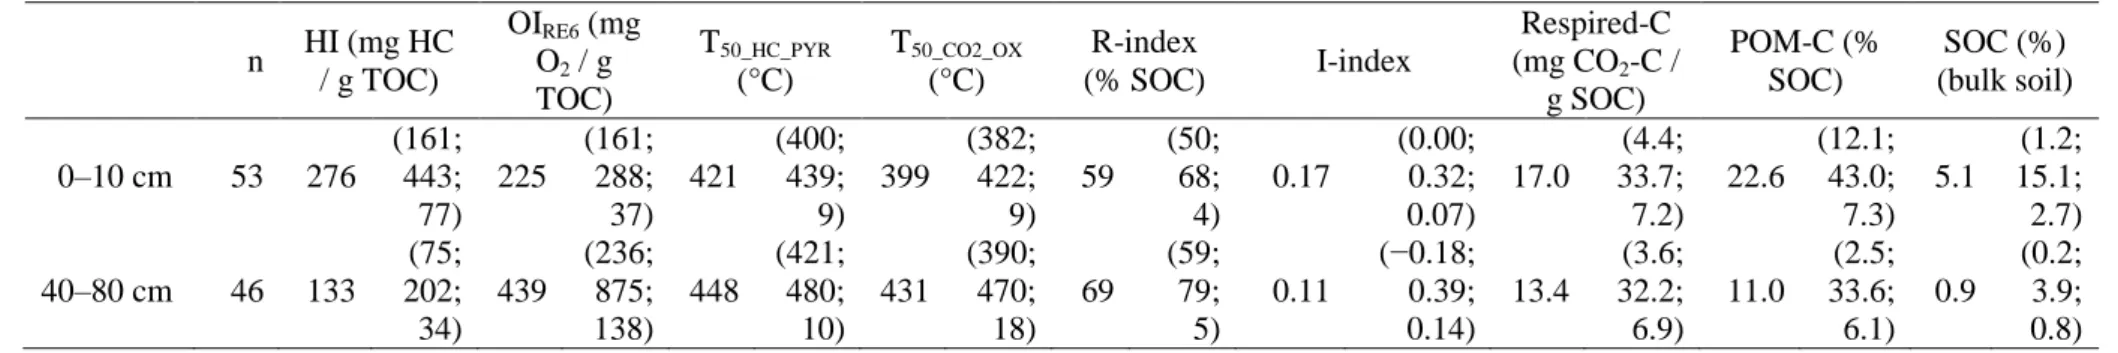 Table 1. Mean (and minimum; maximum; standard deviation) of the RE6 (HI, OI RE6 , T 50_HC_PYR , T 50_CO2_OX , R-index, I-index), respiration test  (10-week mineralizable C, respired-C) and POM fractionation (POM-C) parameters, as well as the bulk SOC conte